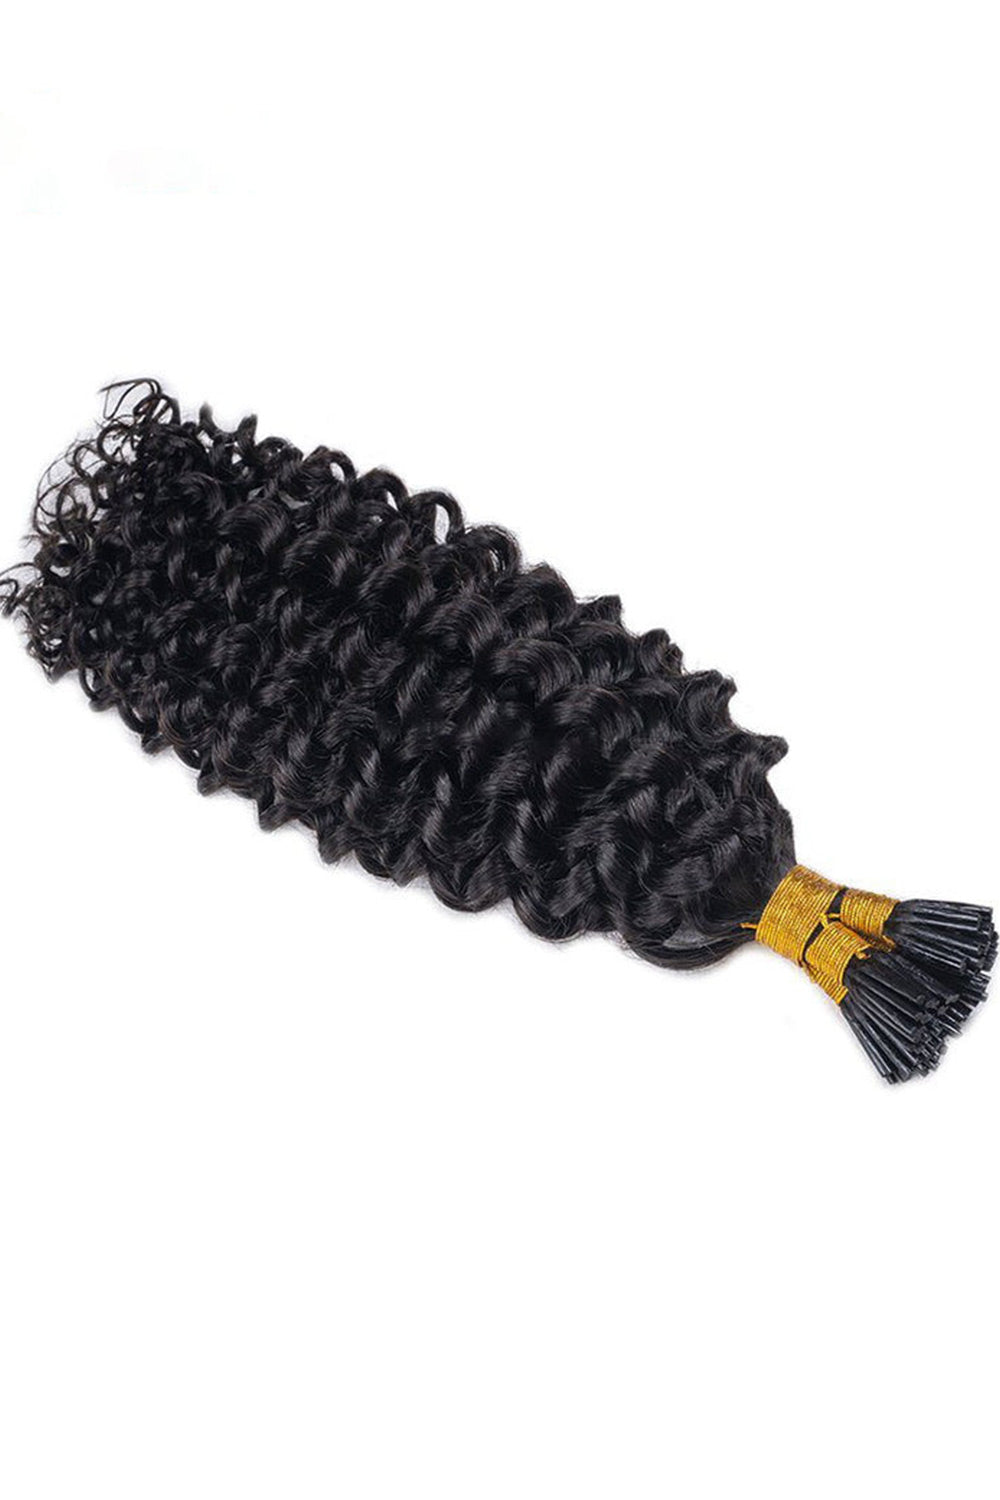 I Tip Black Hair Curly Remy Human Hair Extensions